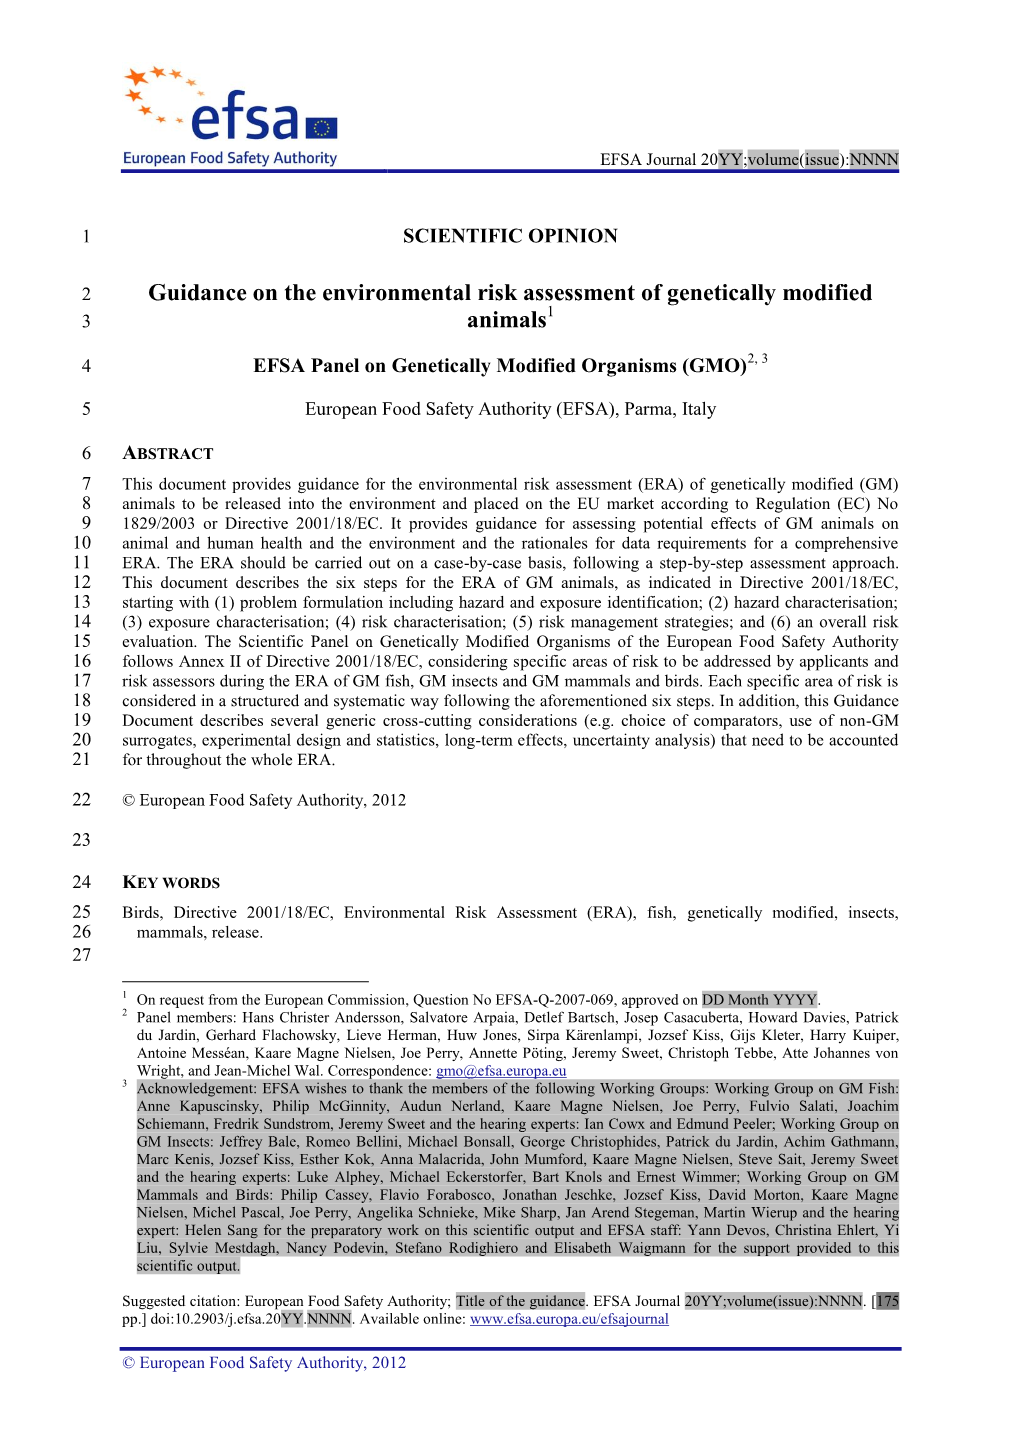 Guidance on the Environmental Risk Assessment of Genetically Modified 1 3 Animals